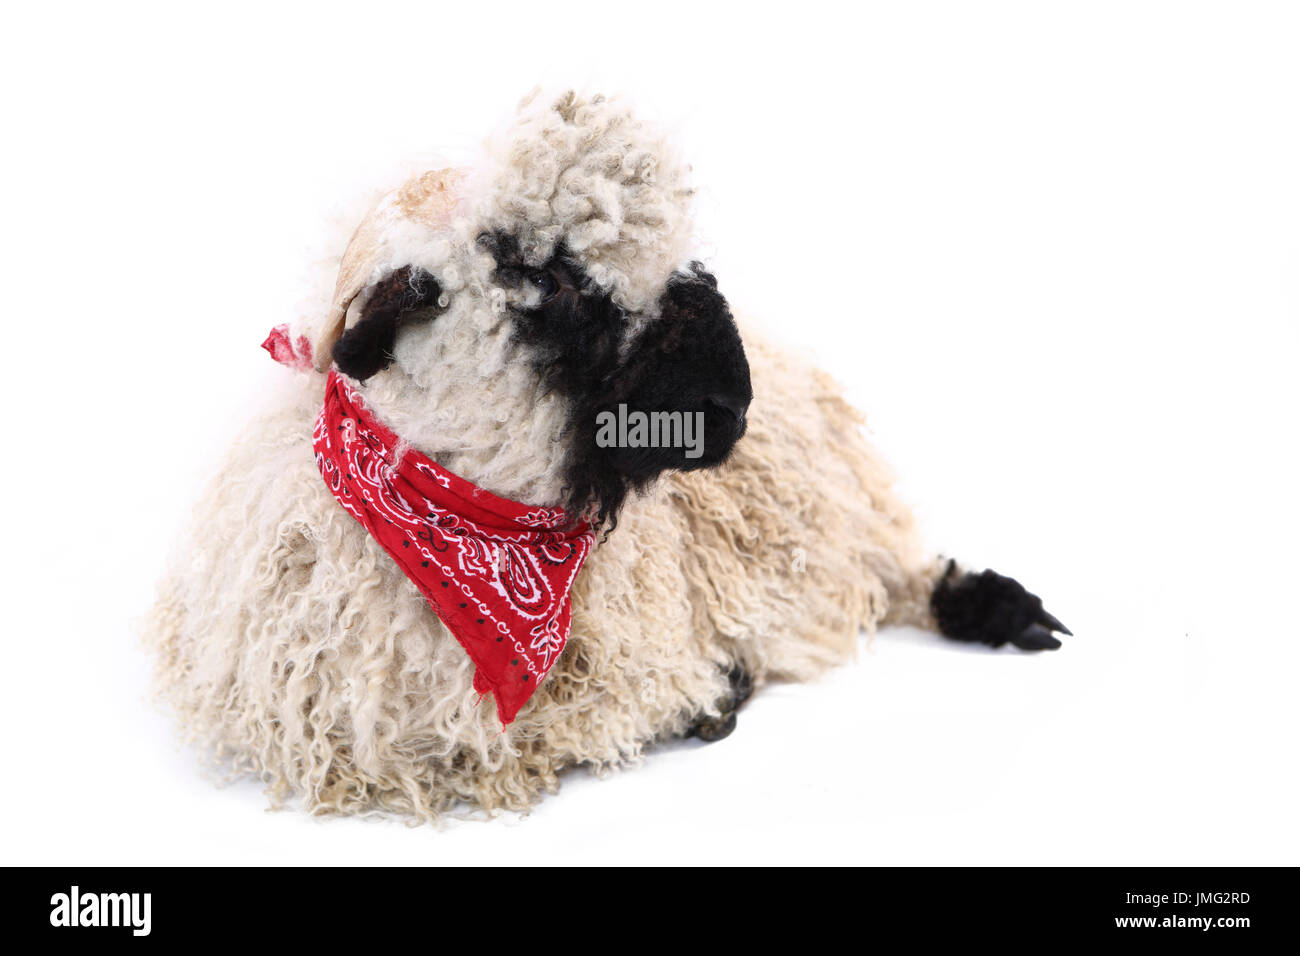 Valais Blacknose Sheep. Lamb lying, wearing red scarf. Studio picture against a white background. Germany Stock Photo